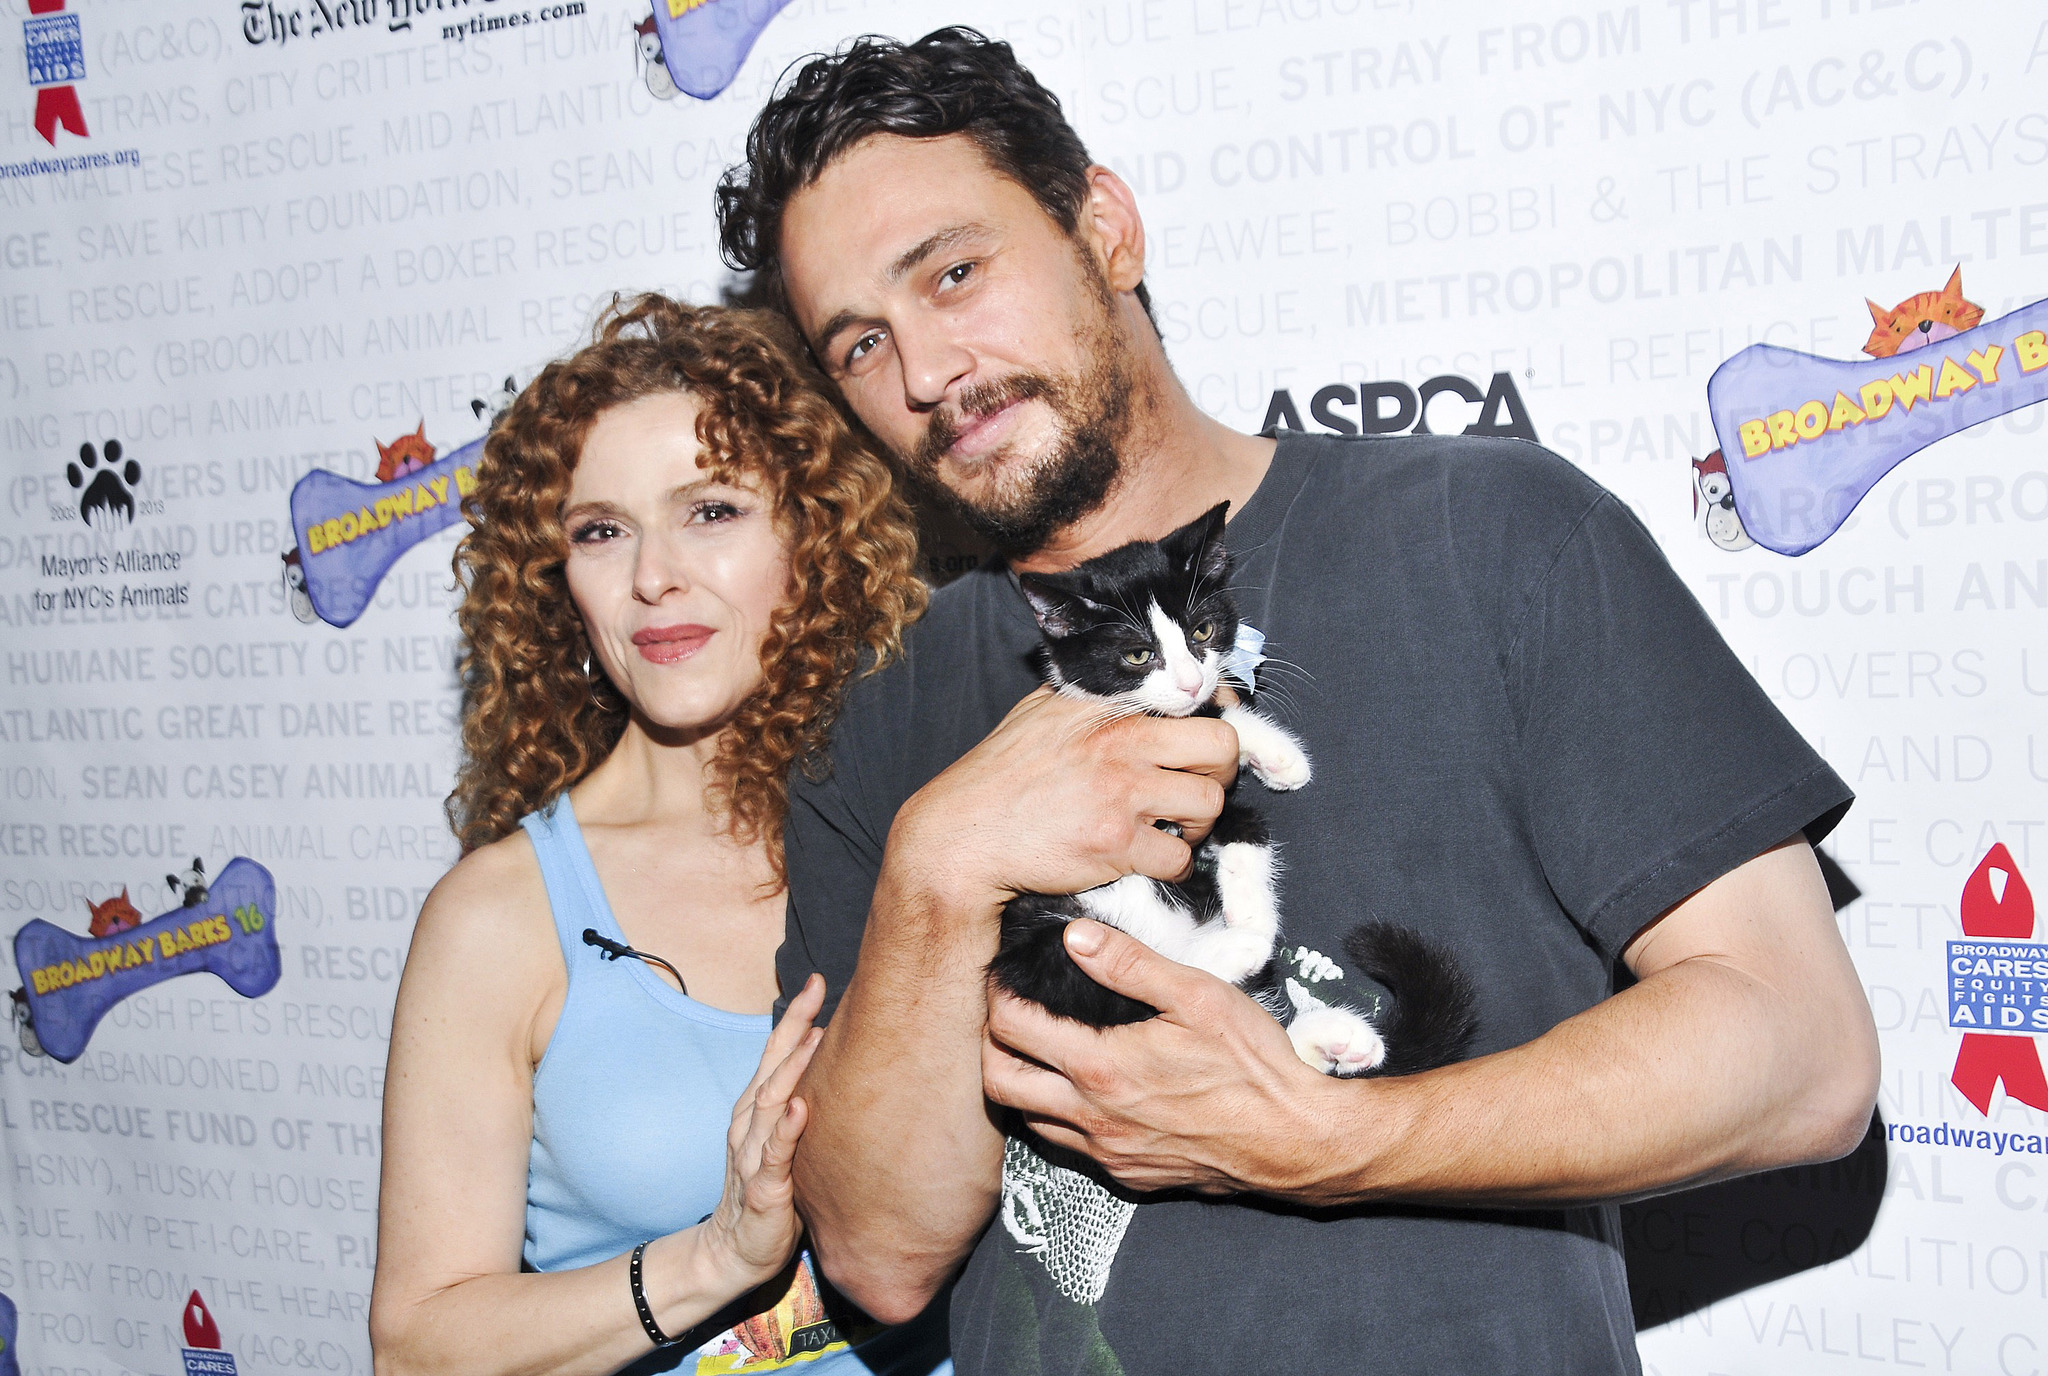 Bernadette Peters, James Franco and kitten Totes Magotes attend Broadway Barks 16 at Shubert Alley on July 12, 2014 in New York City.